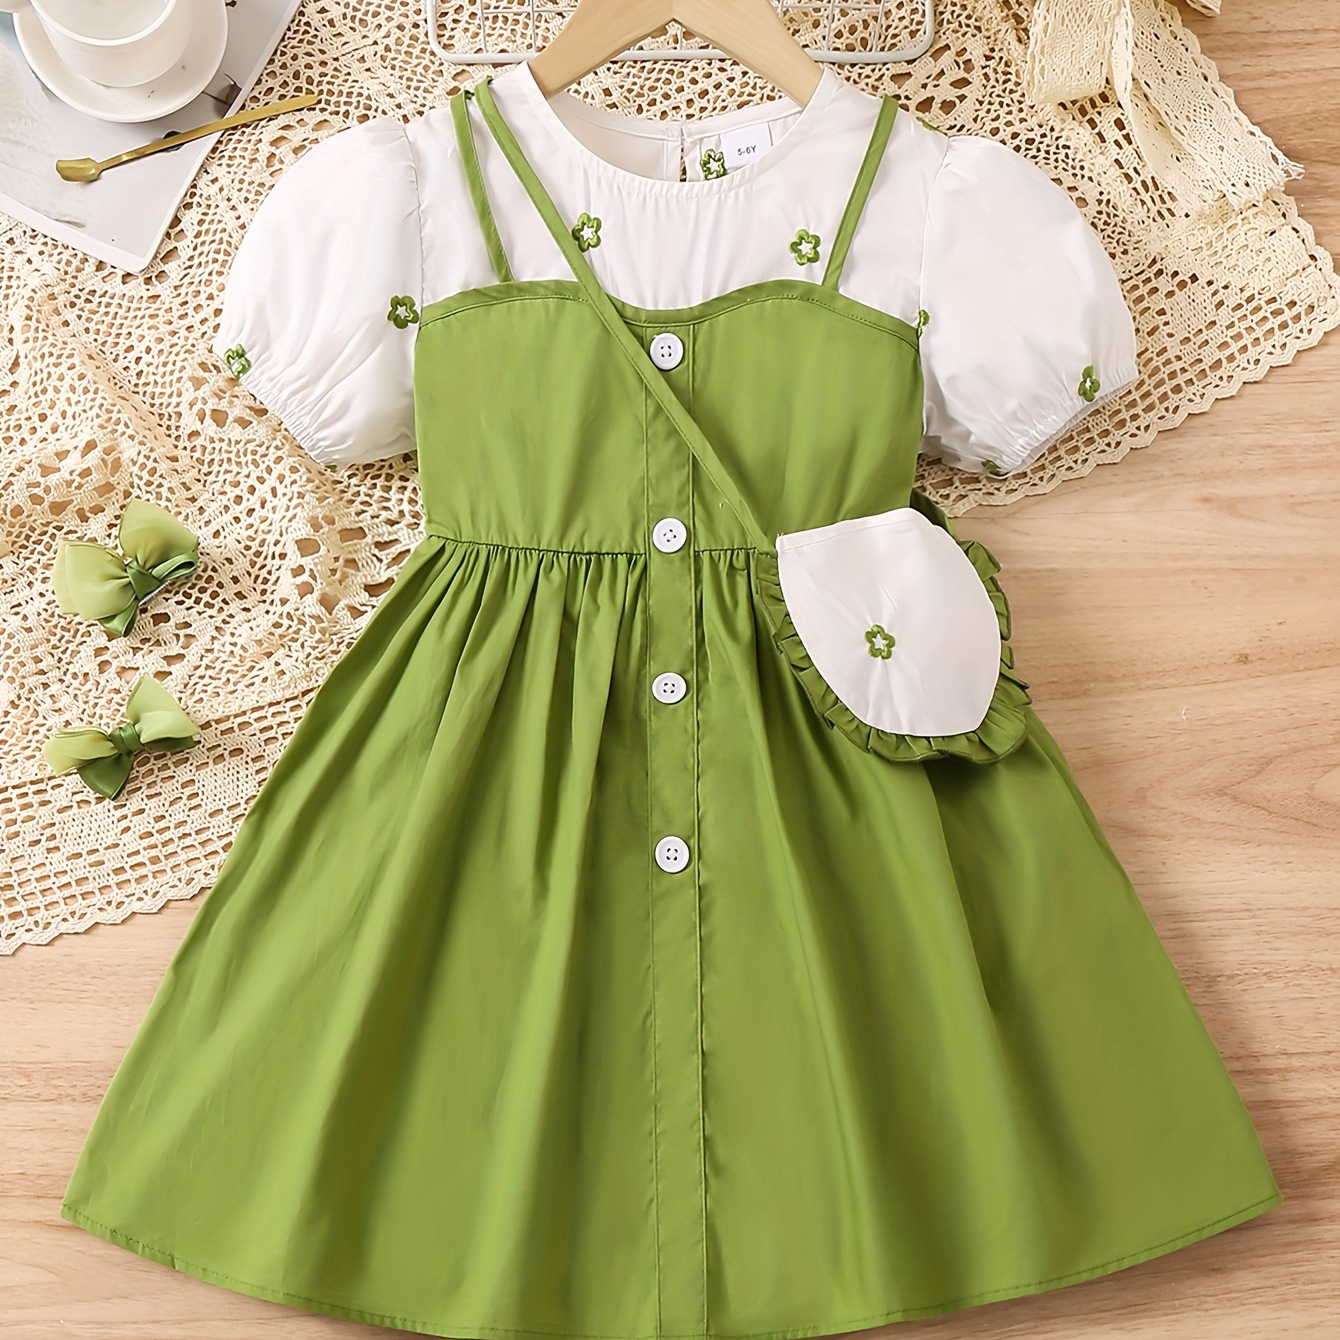 

Sweet Elegant Girls 100% Cotton Splicing Button Decor Short Sleeve Dress With Bag For Summer Party Gift